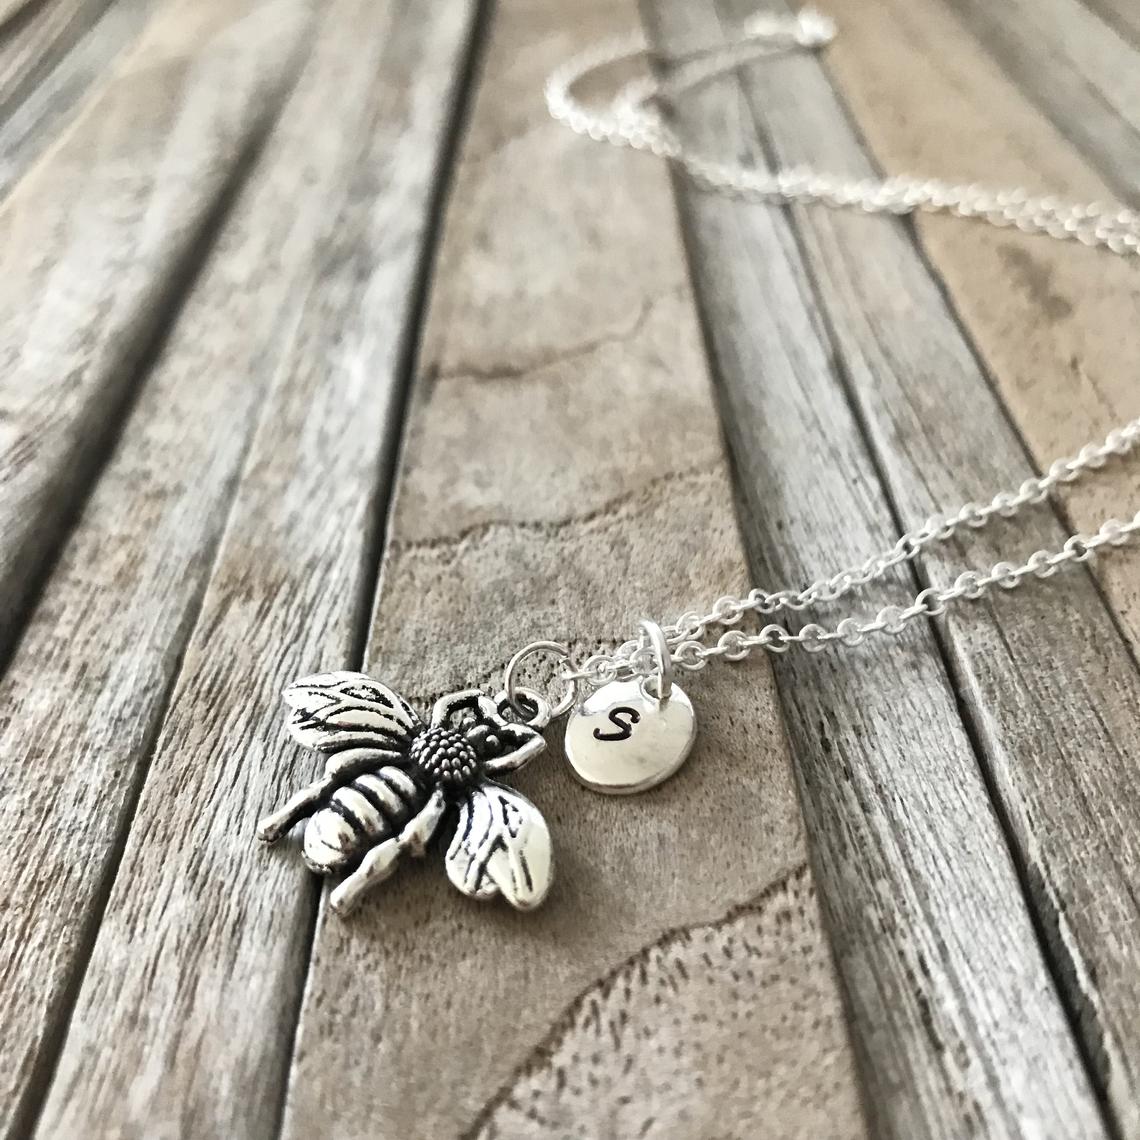 Personalized bumble bee necklace, Bee necklace, Silver bee charm, Honey bee jewelry